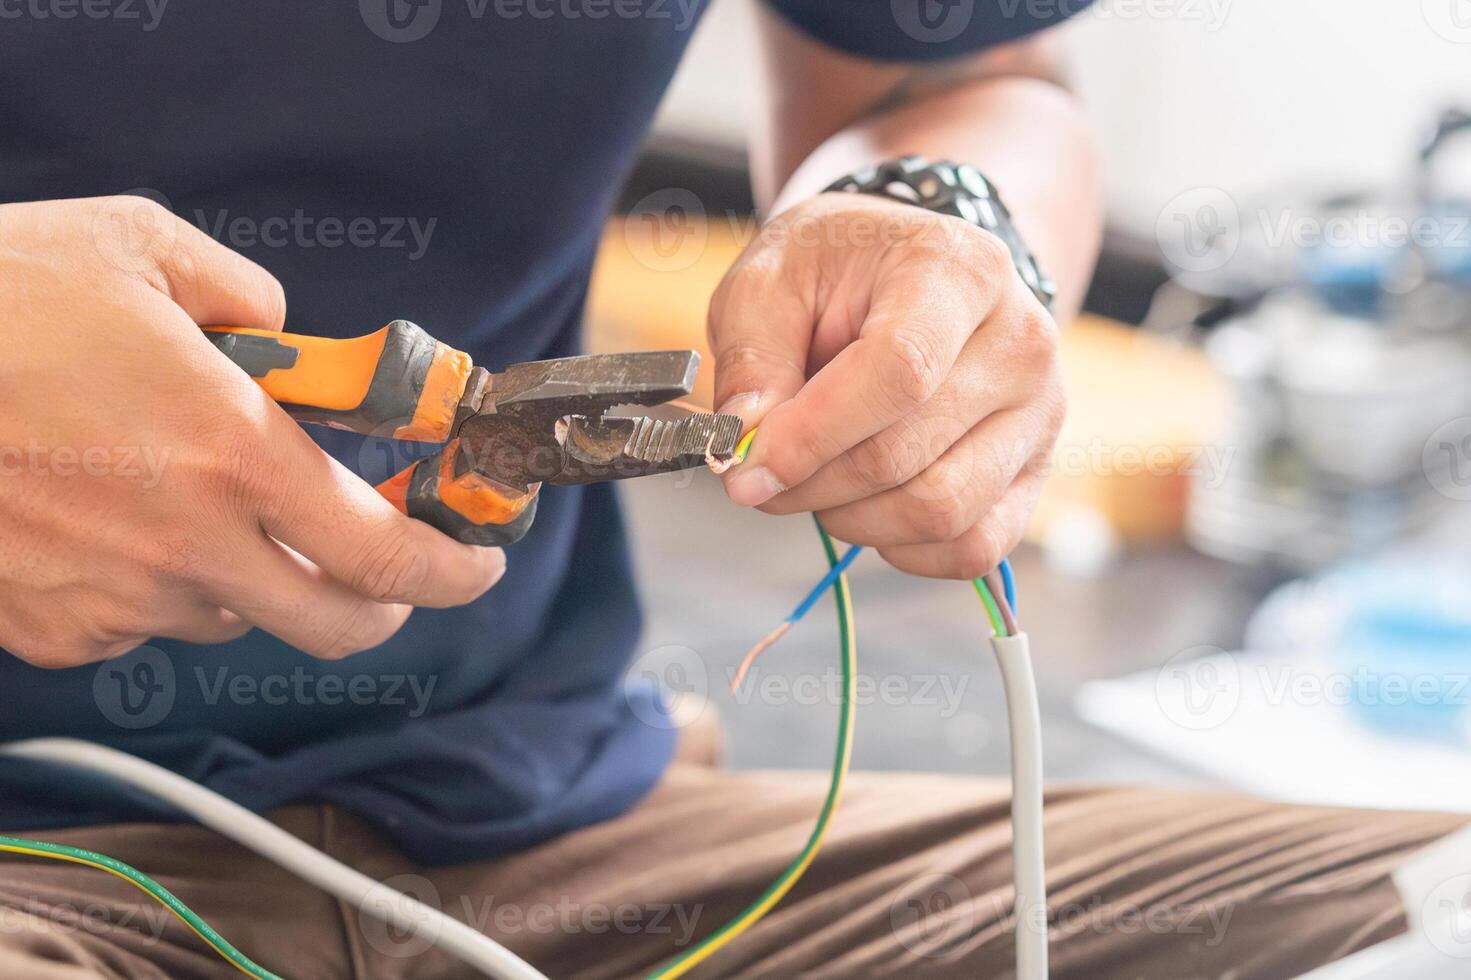 Technician man connecting electric wires with pliers to install new air conditioning, repair service, and install new air conditioner concepts photo